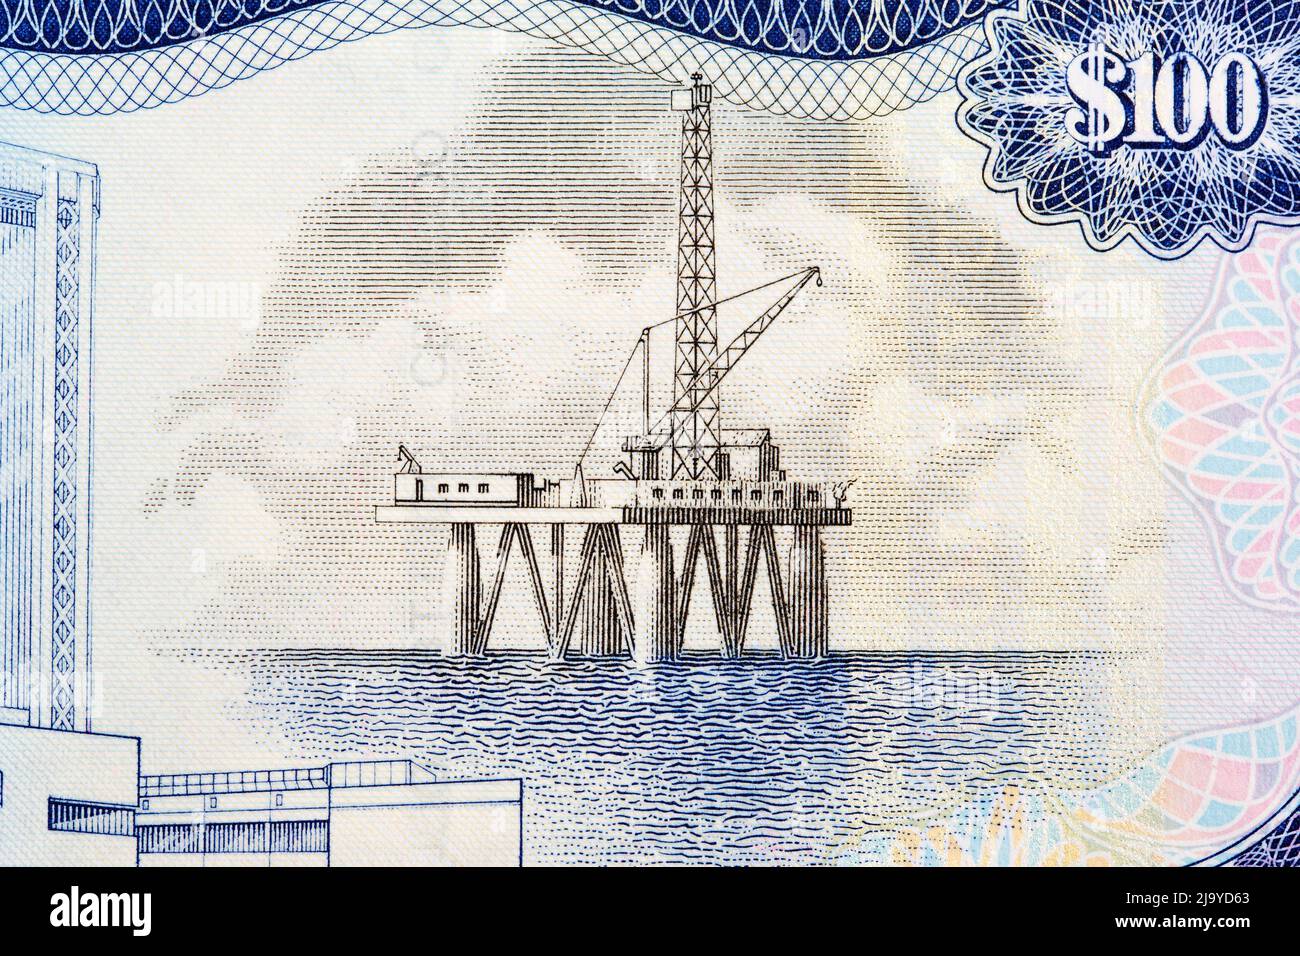 Offshore oil platform from money of Trinidad and Tobago - Dollar Stock Photo